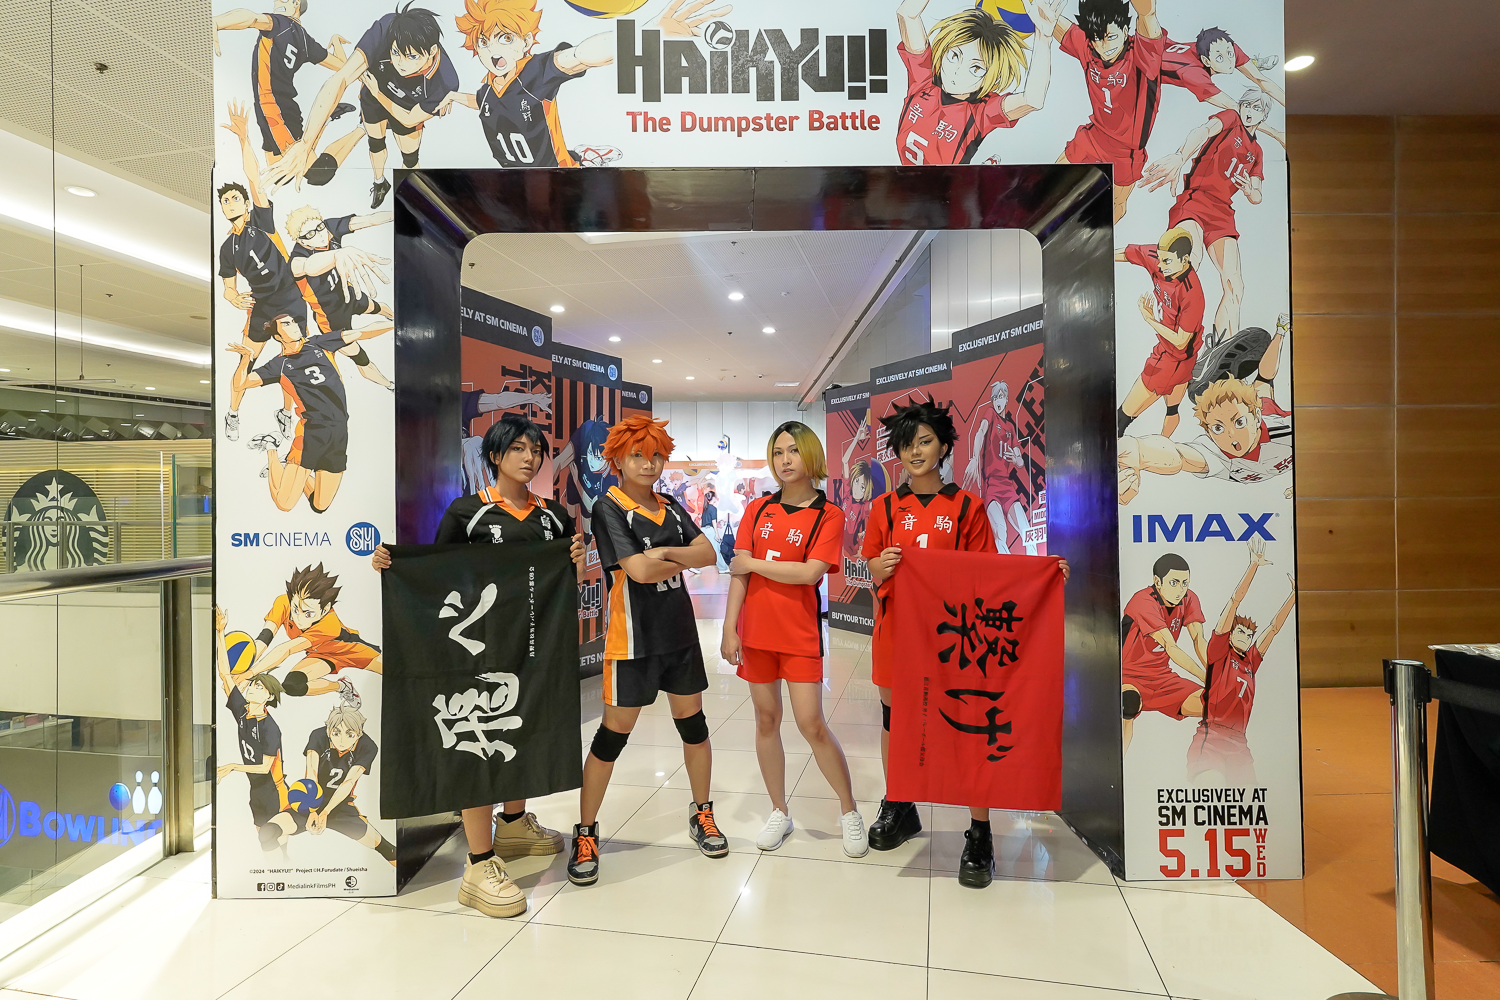 Watch and Experience the Haikyuu Fever Exclusively only at SM Cinema